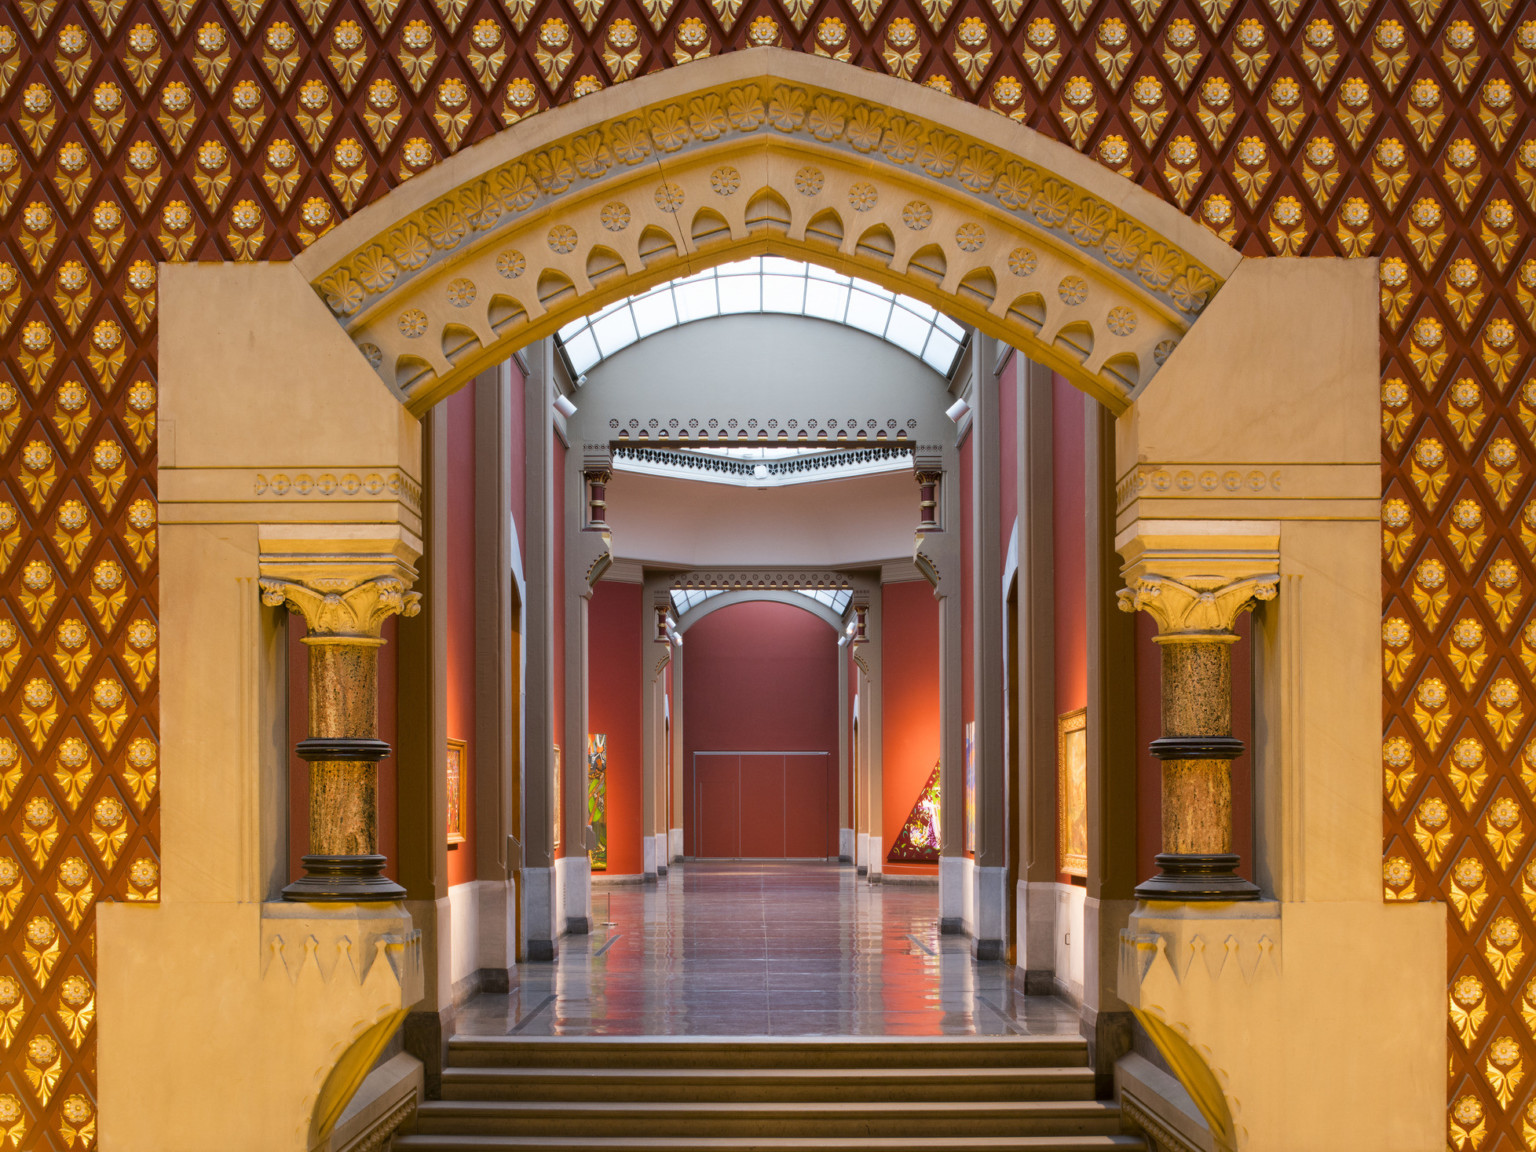 Corridor entry with sculpted stone archway with banded Corinthian columns. The hall is painted red with skylights above